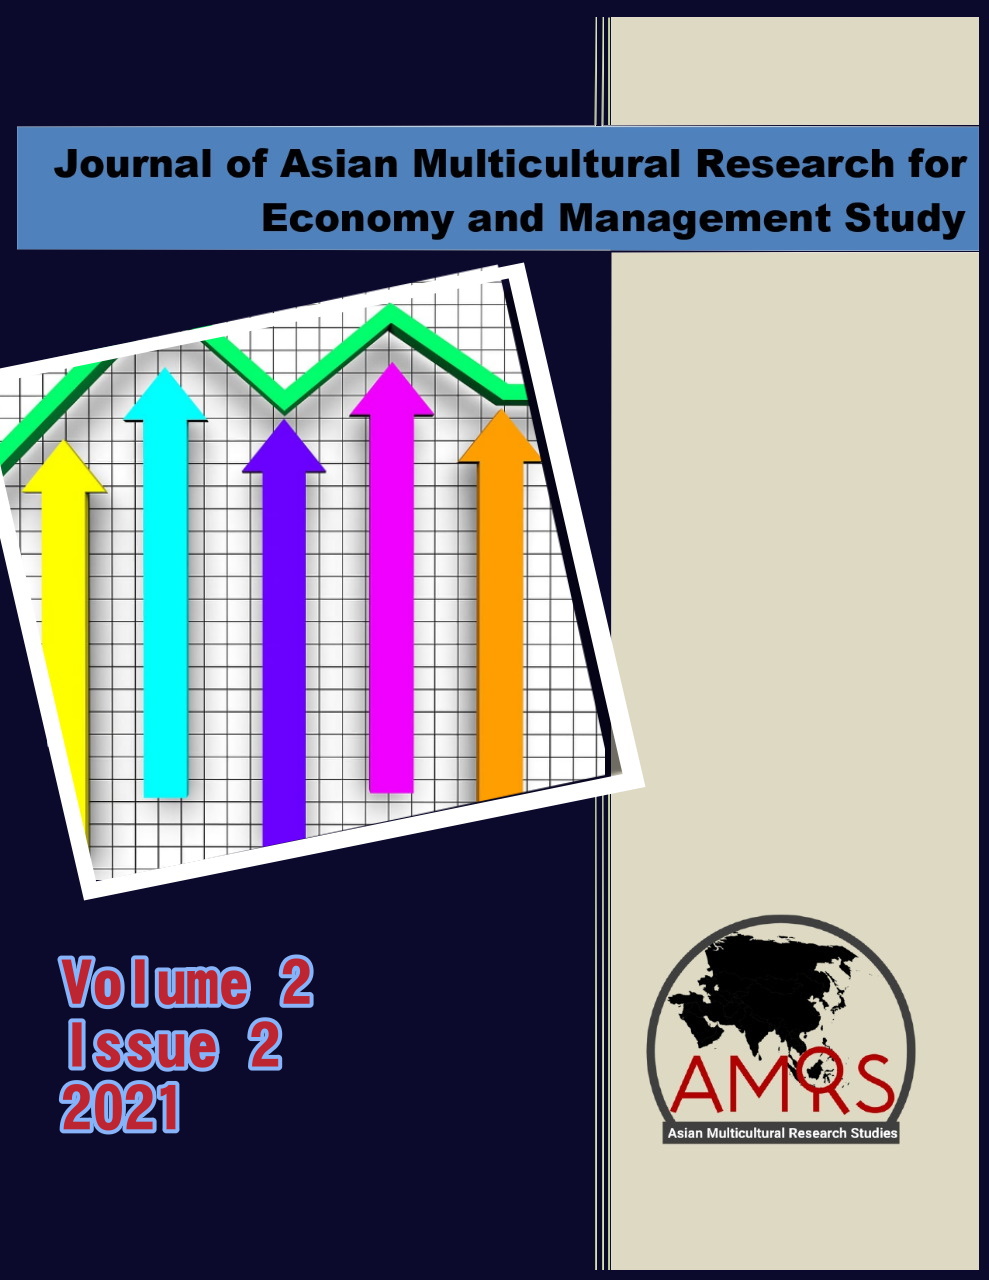 					View Vol. 2 No. 2 (2021): Journal of Asian Multicultural Research for Economy and Management Study
				